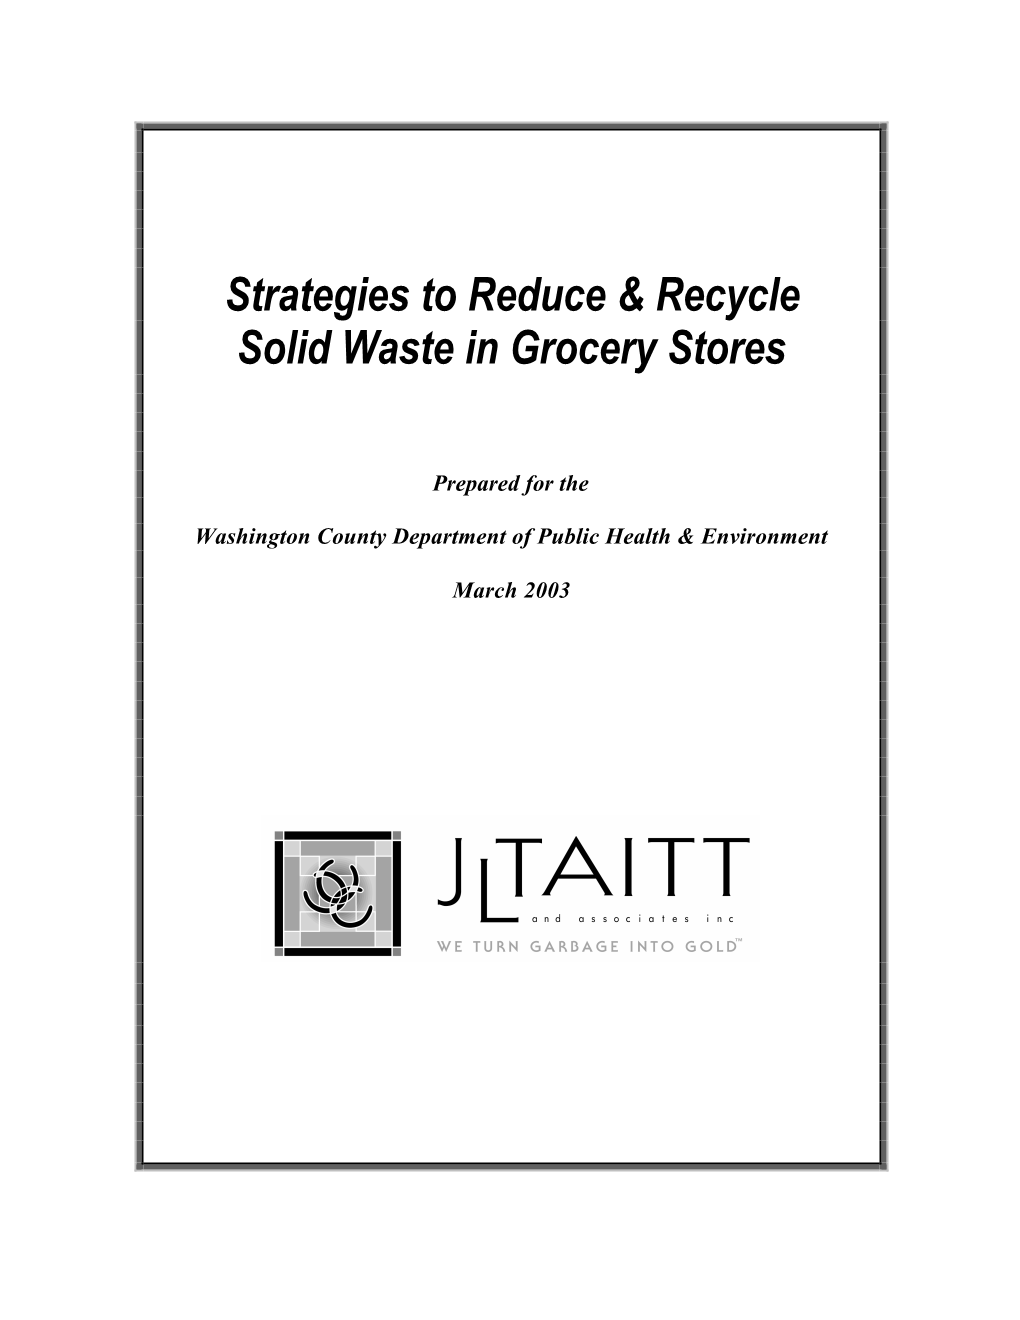 Strategies to Reduce & Recycle Solid Waste in Grocery Stores